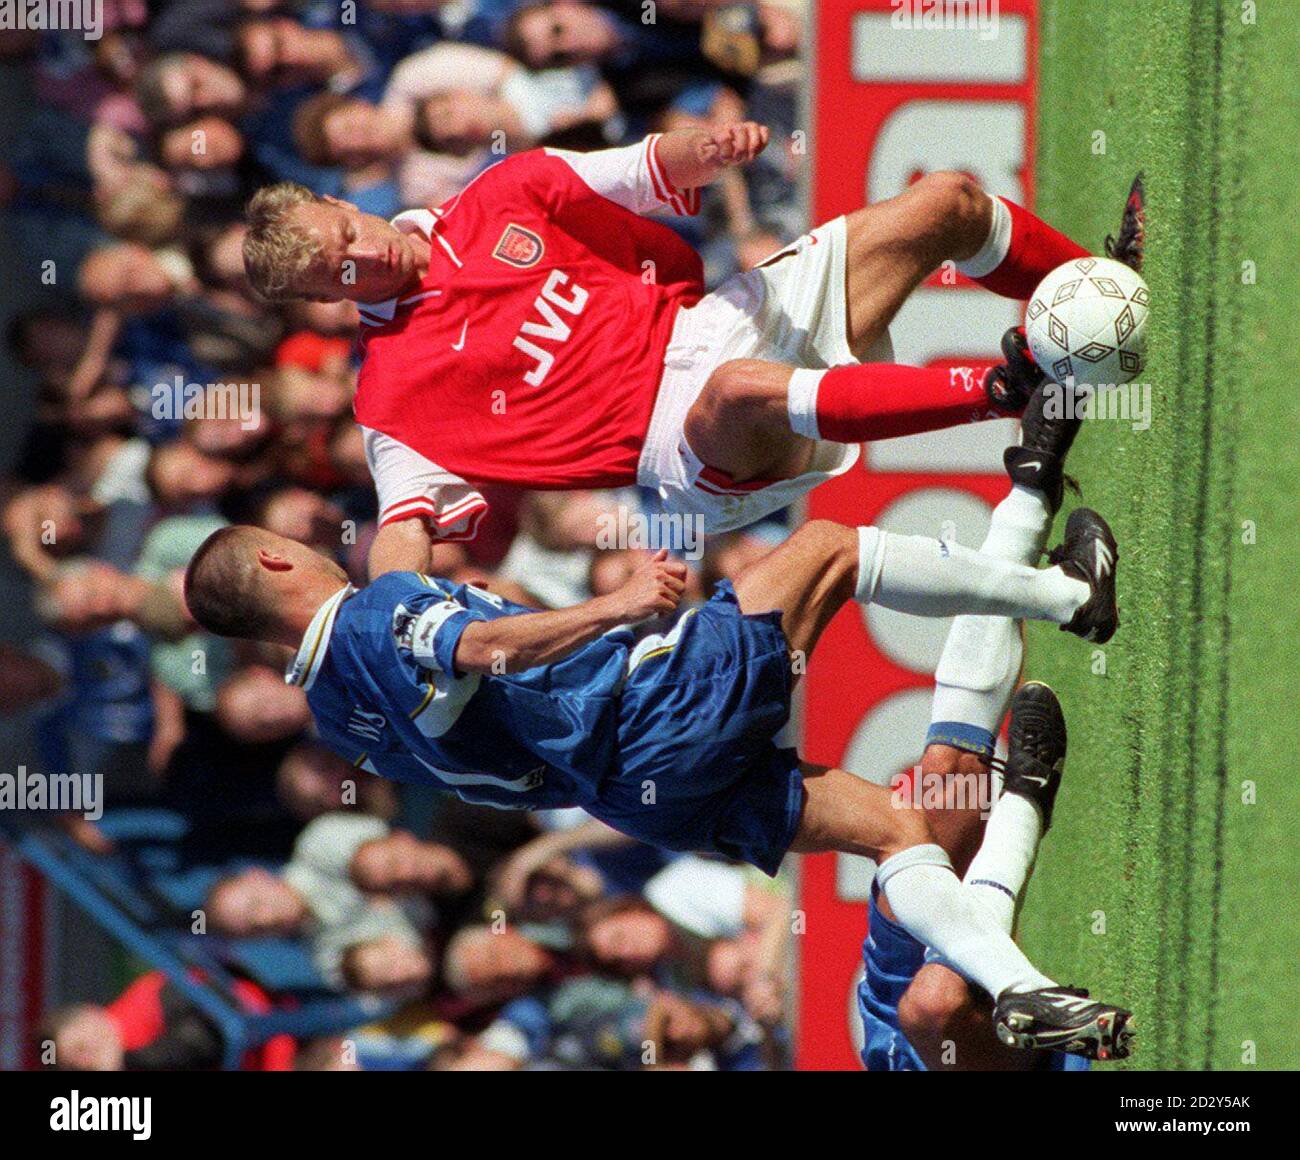 Arsenal's Dennis Bergkamp beats Chelsea's Dennis Wise to the ball during today's (Sunday) Premiership match at Stamford Bridge. Photot by Tony Harris/PA Stock Photo